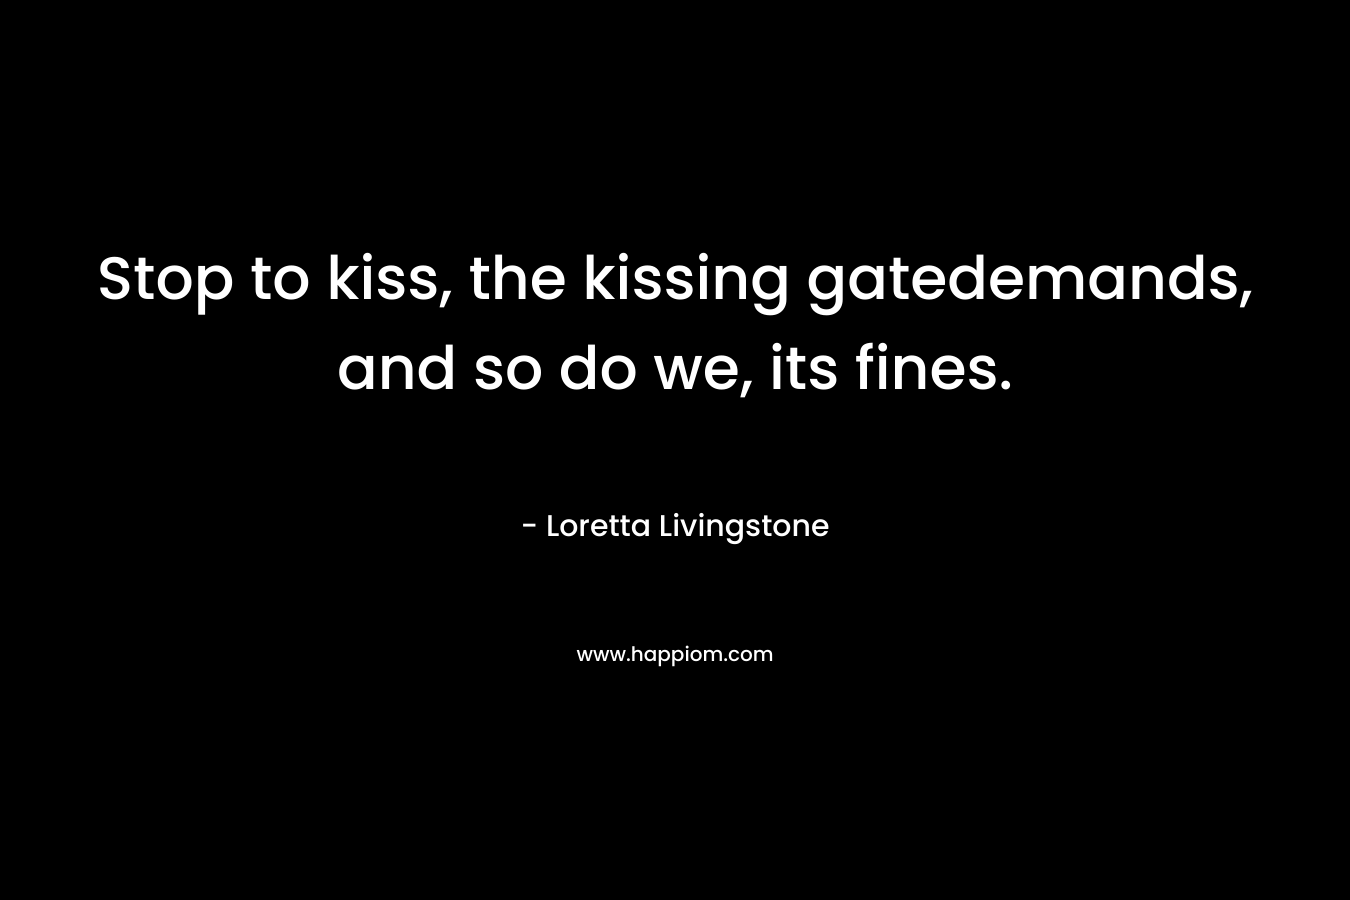 Stop to kiss, the kissing gatedemands, and so do we, its fines.